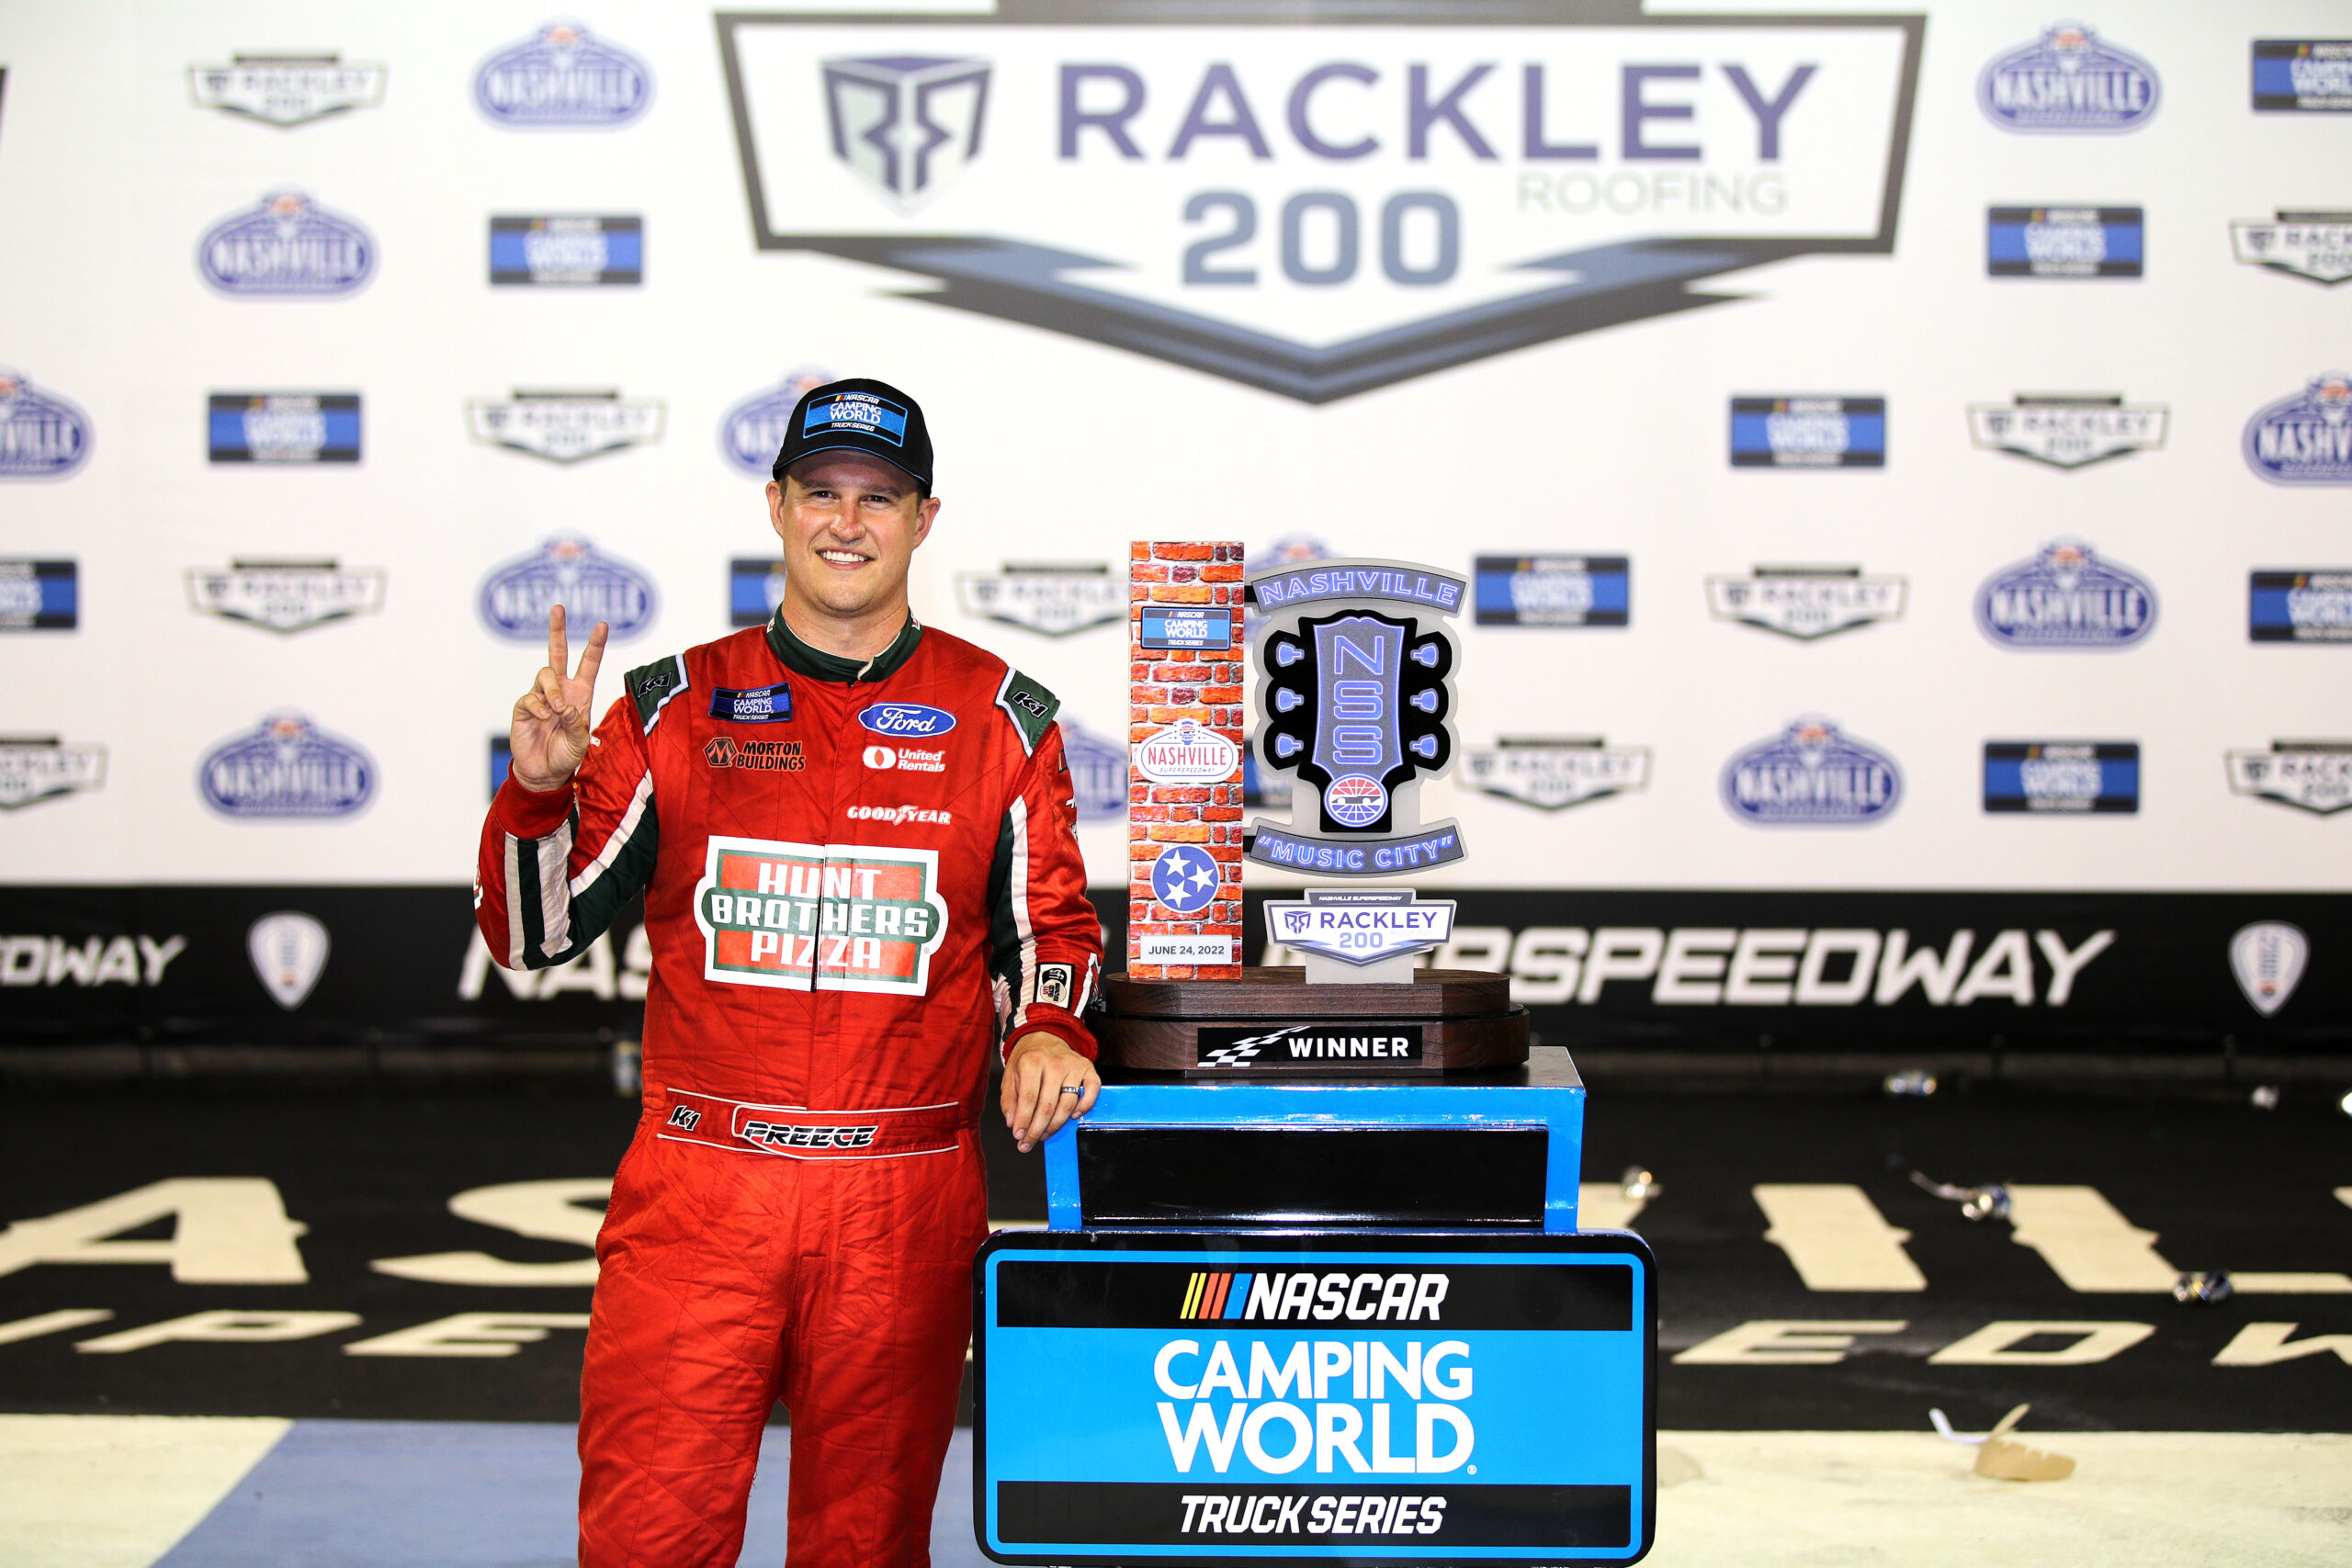 Ryan Preece scores second consecutive Truck Series victory at Nashville